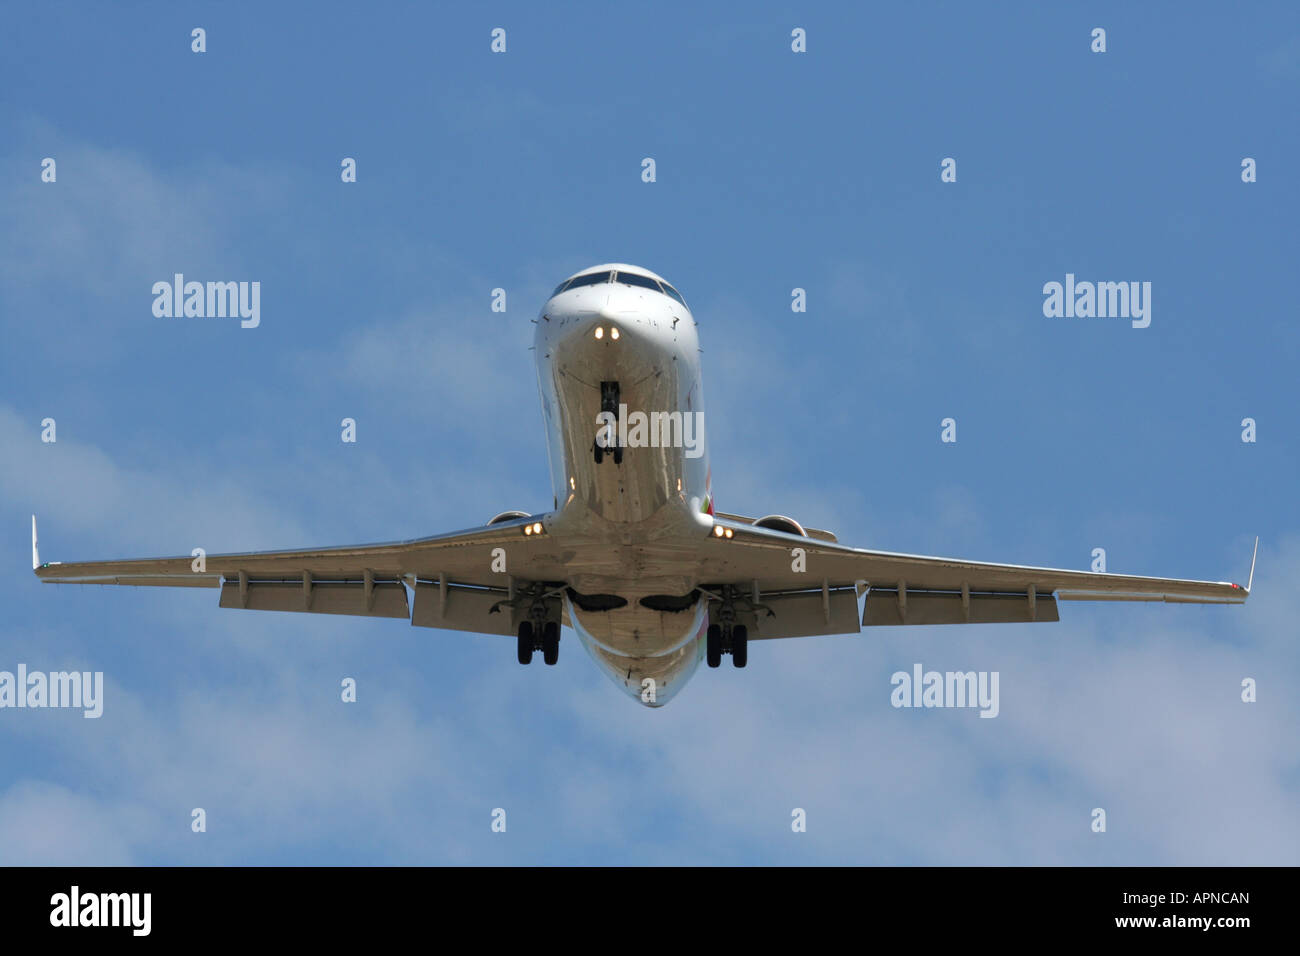 Air travel. CRJ200 regional airliner on approach for landing. Proprietary details deleted. Stock Photo